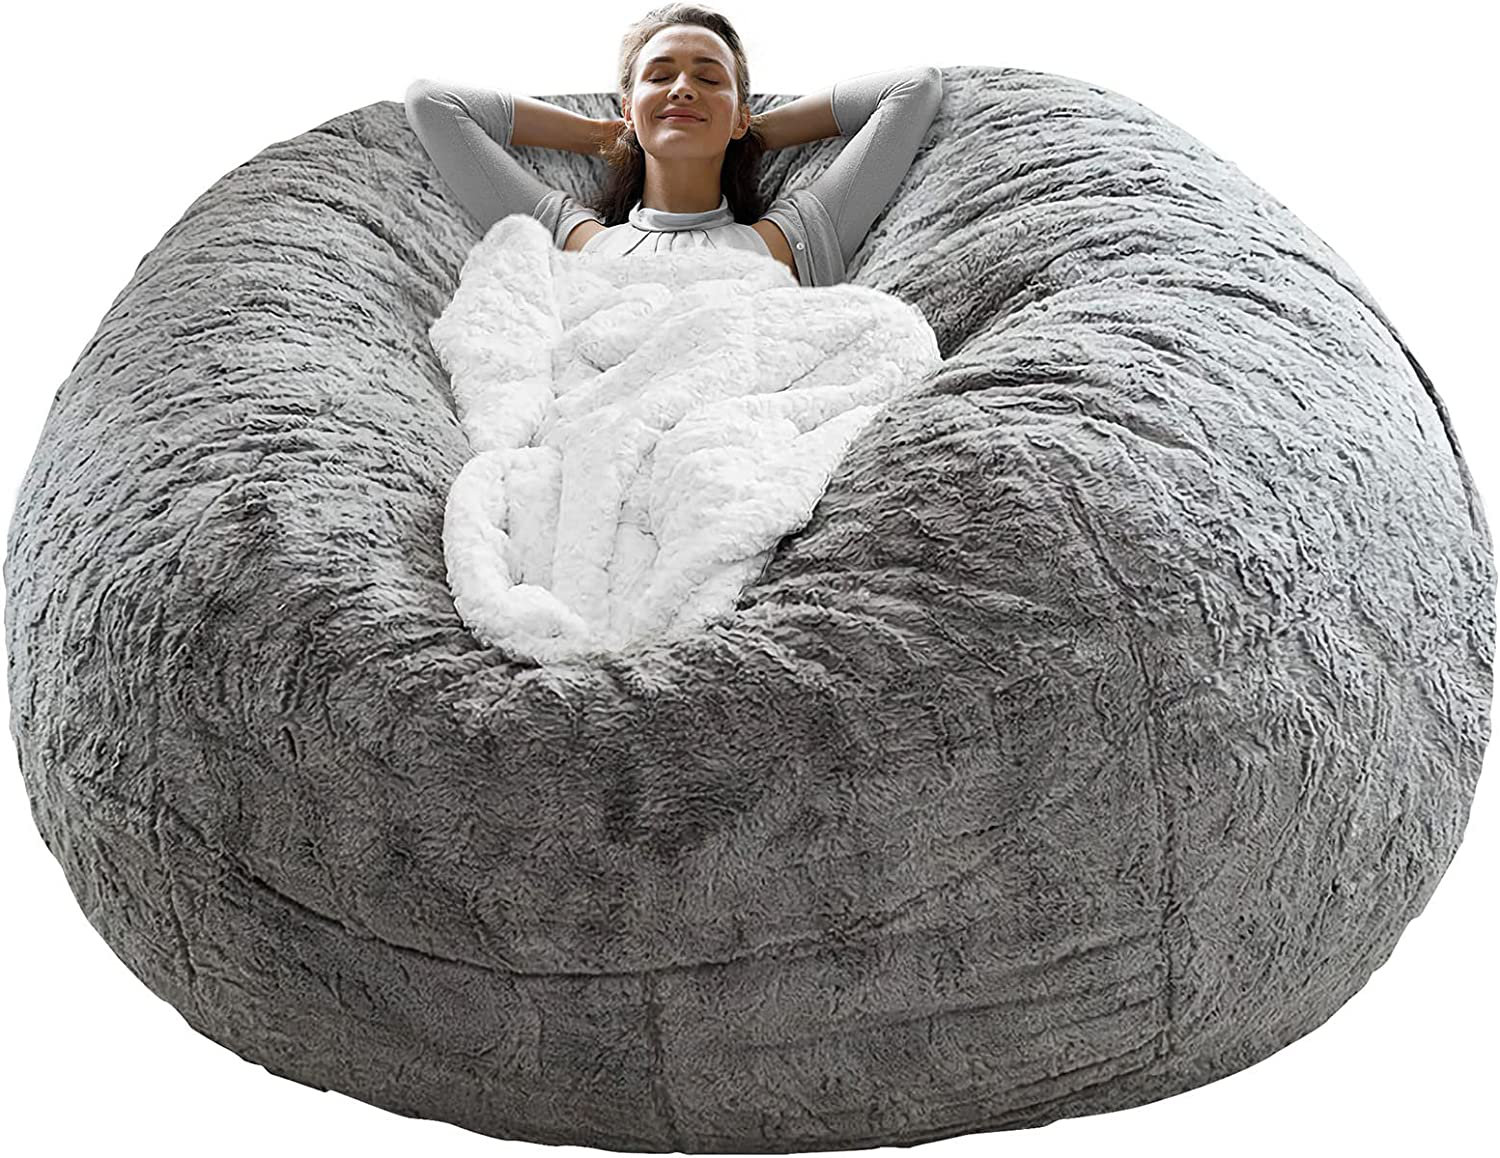 Large Outdoor Bean Bag Cover